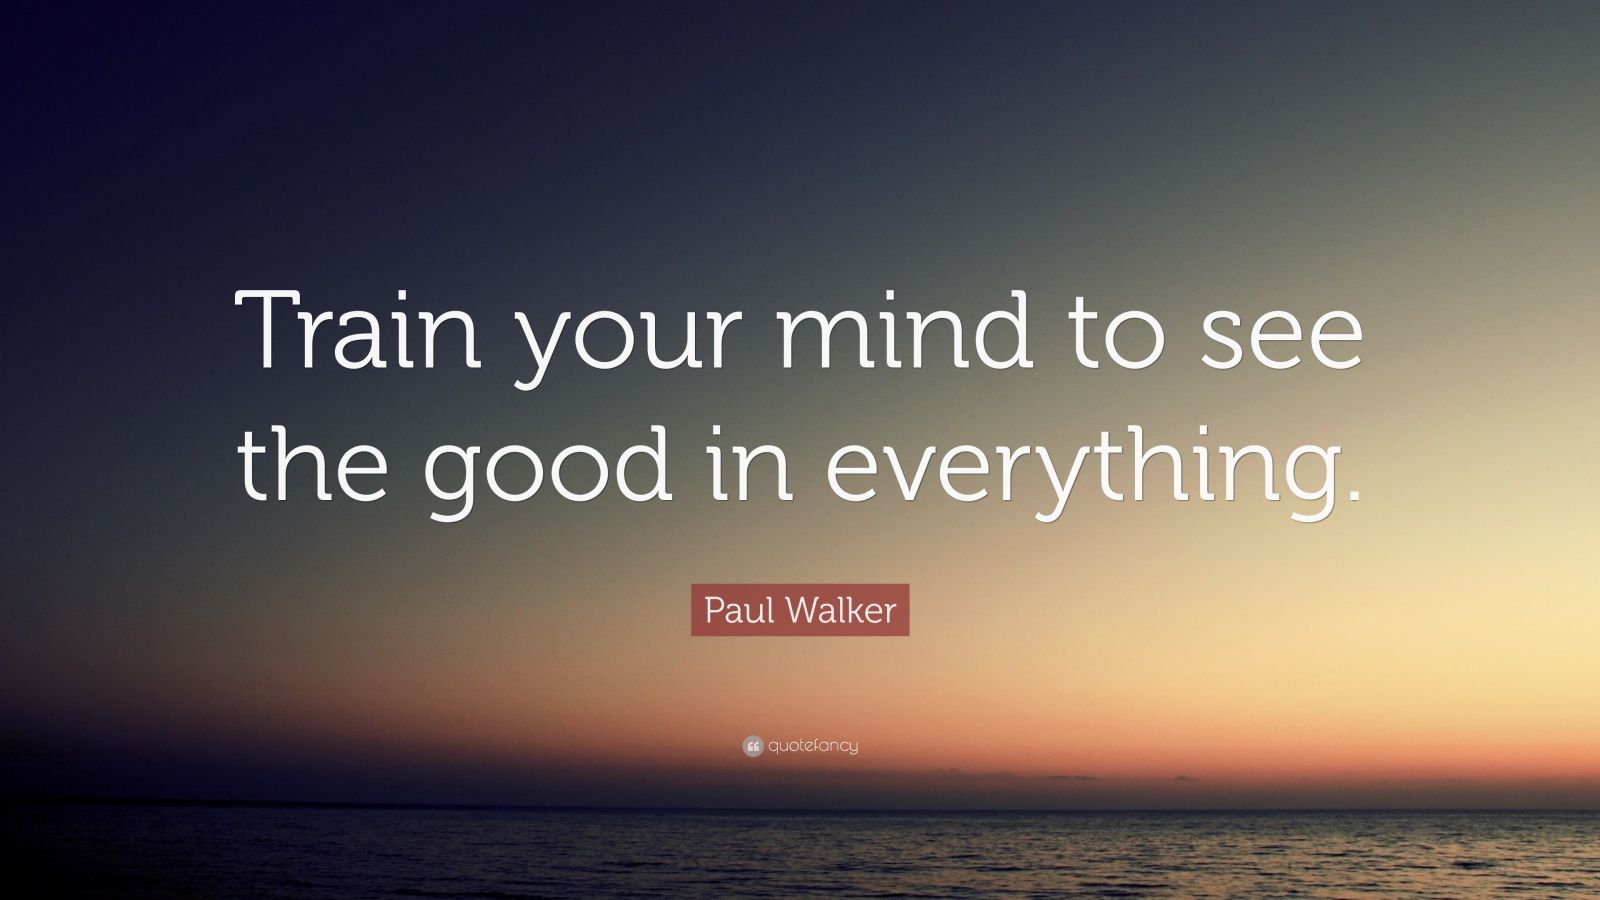 Paul Walker Quote Train Your Mind To See The Good In Everything Wallpapers Quotefancy